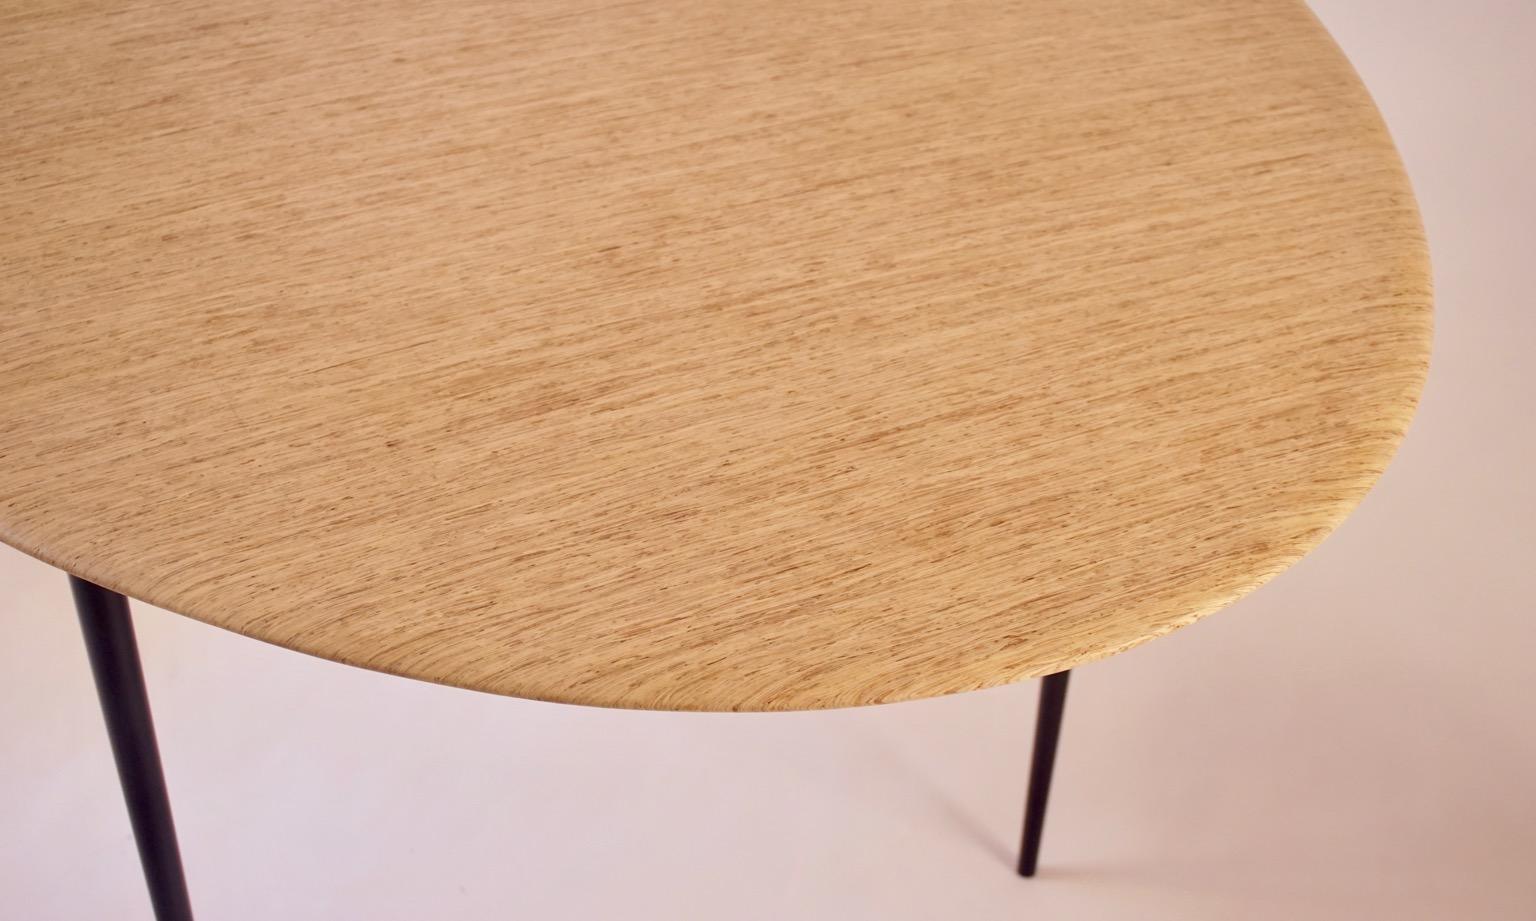 One of Lehrecke's early designs from 1993, this oval version of the egg table is quite unique. Both the large size, and the timberstrand top are very unusual. Timberstrand is a construction material, used in timber construction for house building.